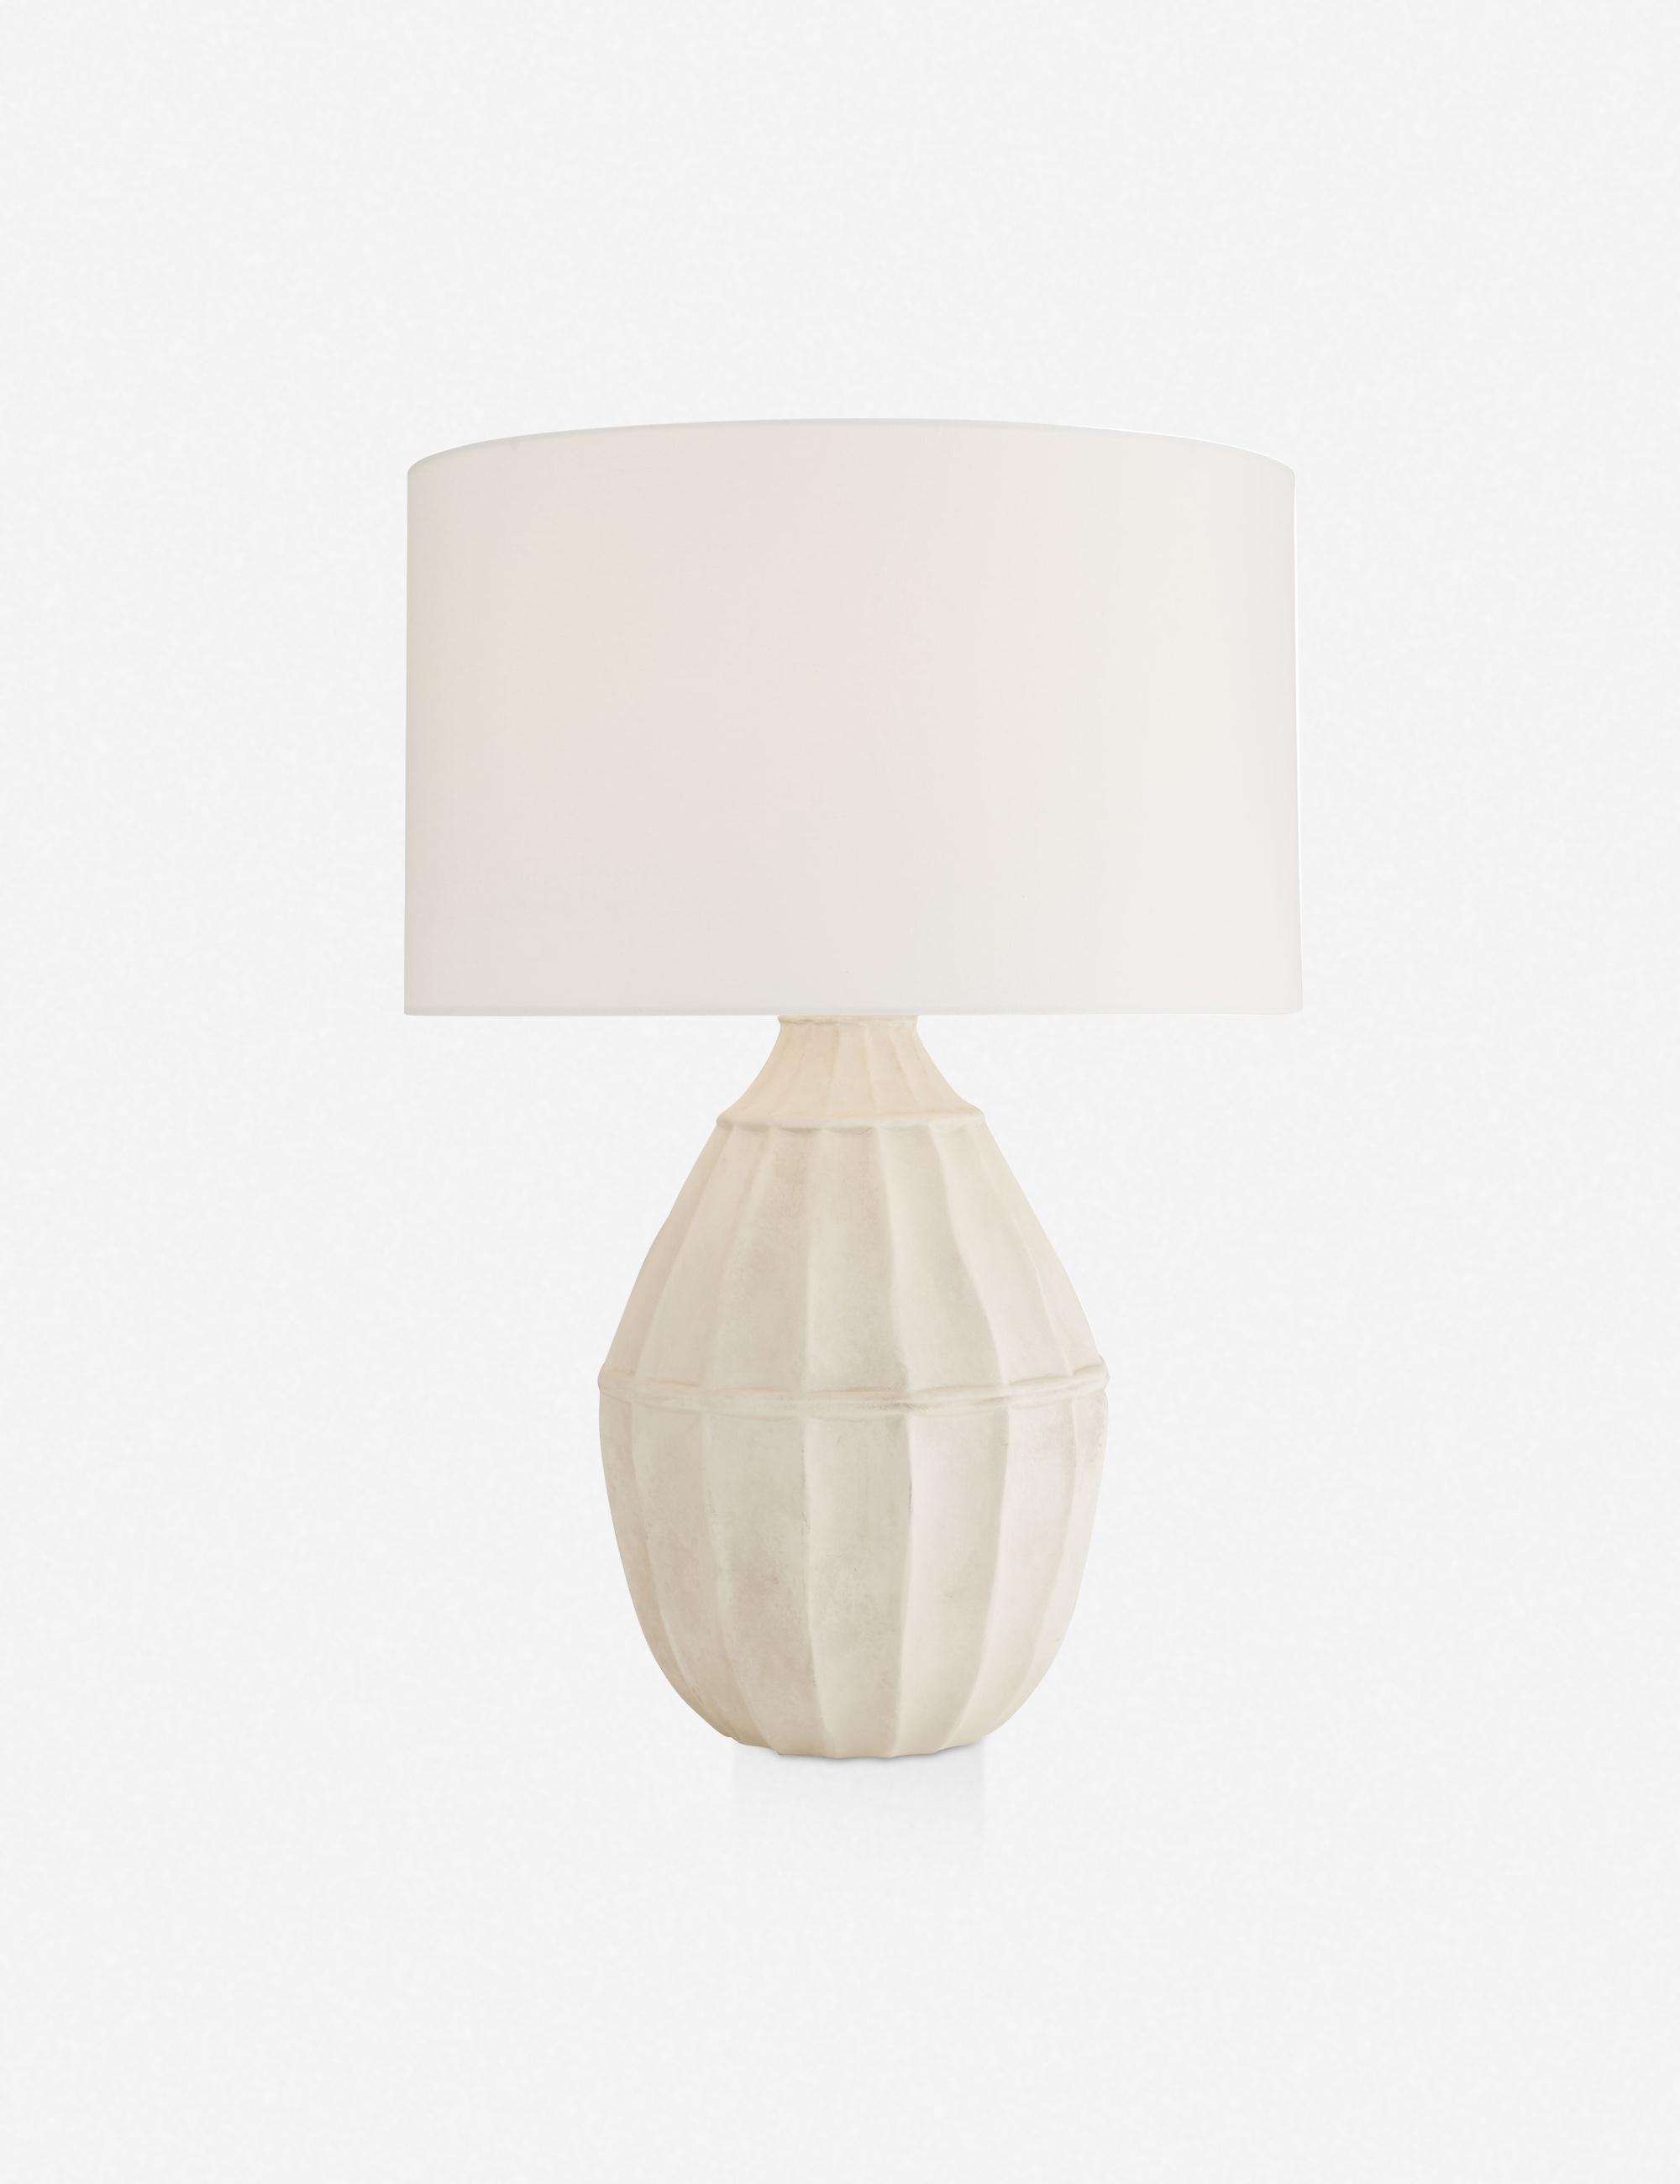 Tangier Table Lamp by Beth Webb for Arteriors - Image 2